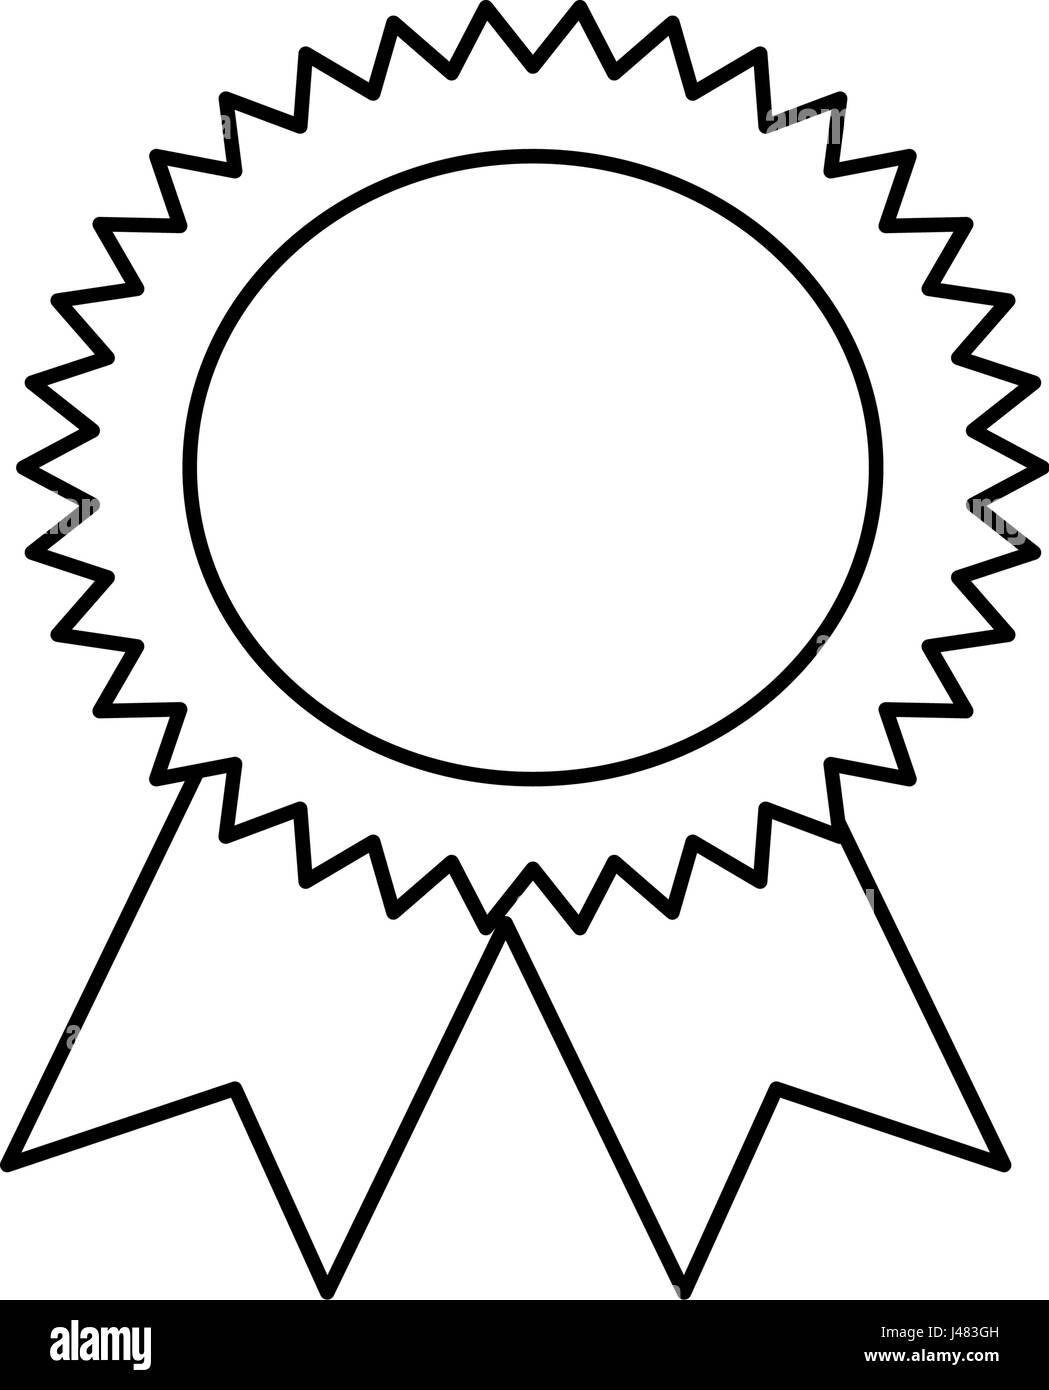 medal icon image Stock Vector